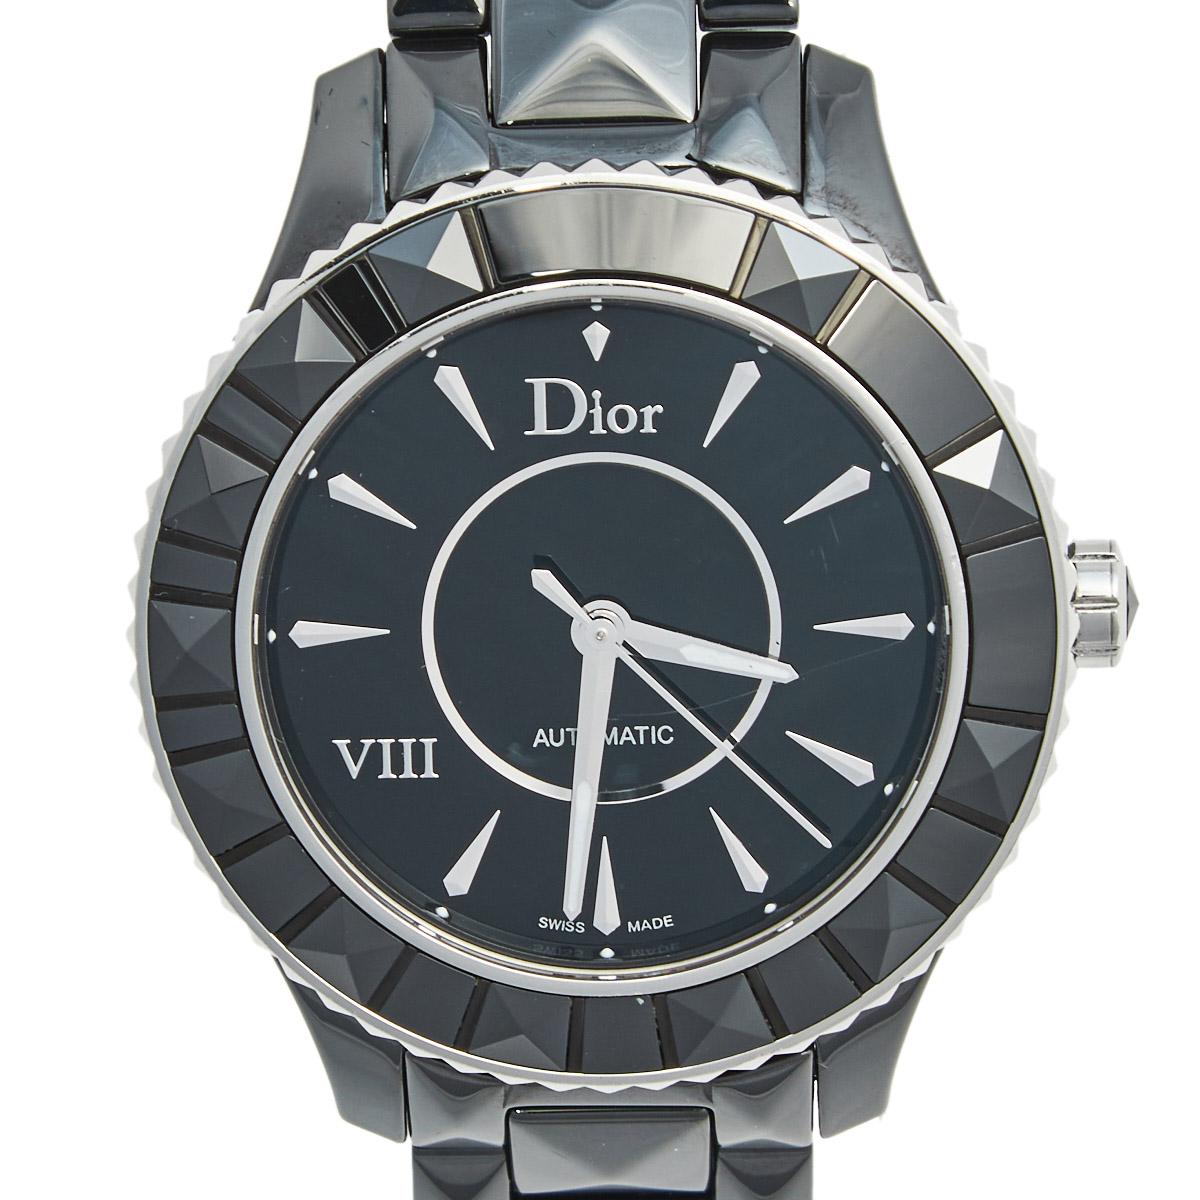 Dior brings you this gorgeous timepiece from their VIII Place Vendome collection to flaunt on your wrist. It has a stylish case made from stainless steel and ceramic. The unidirectional rotating bezel is decorated with crystals and the black dial is